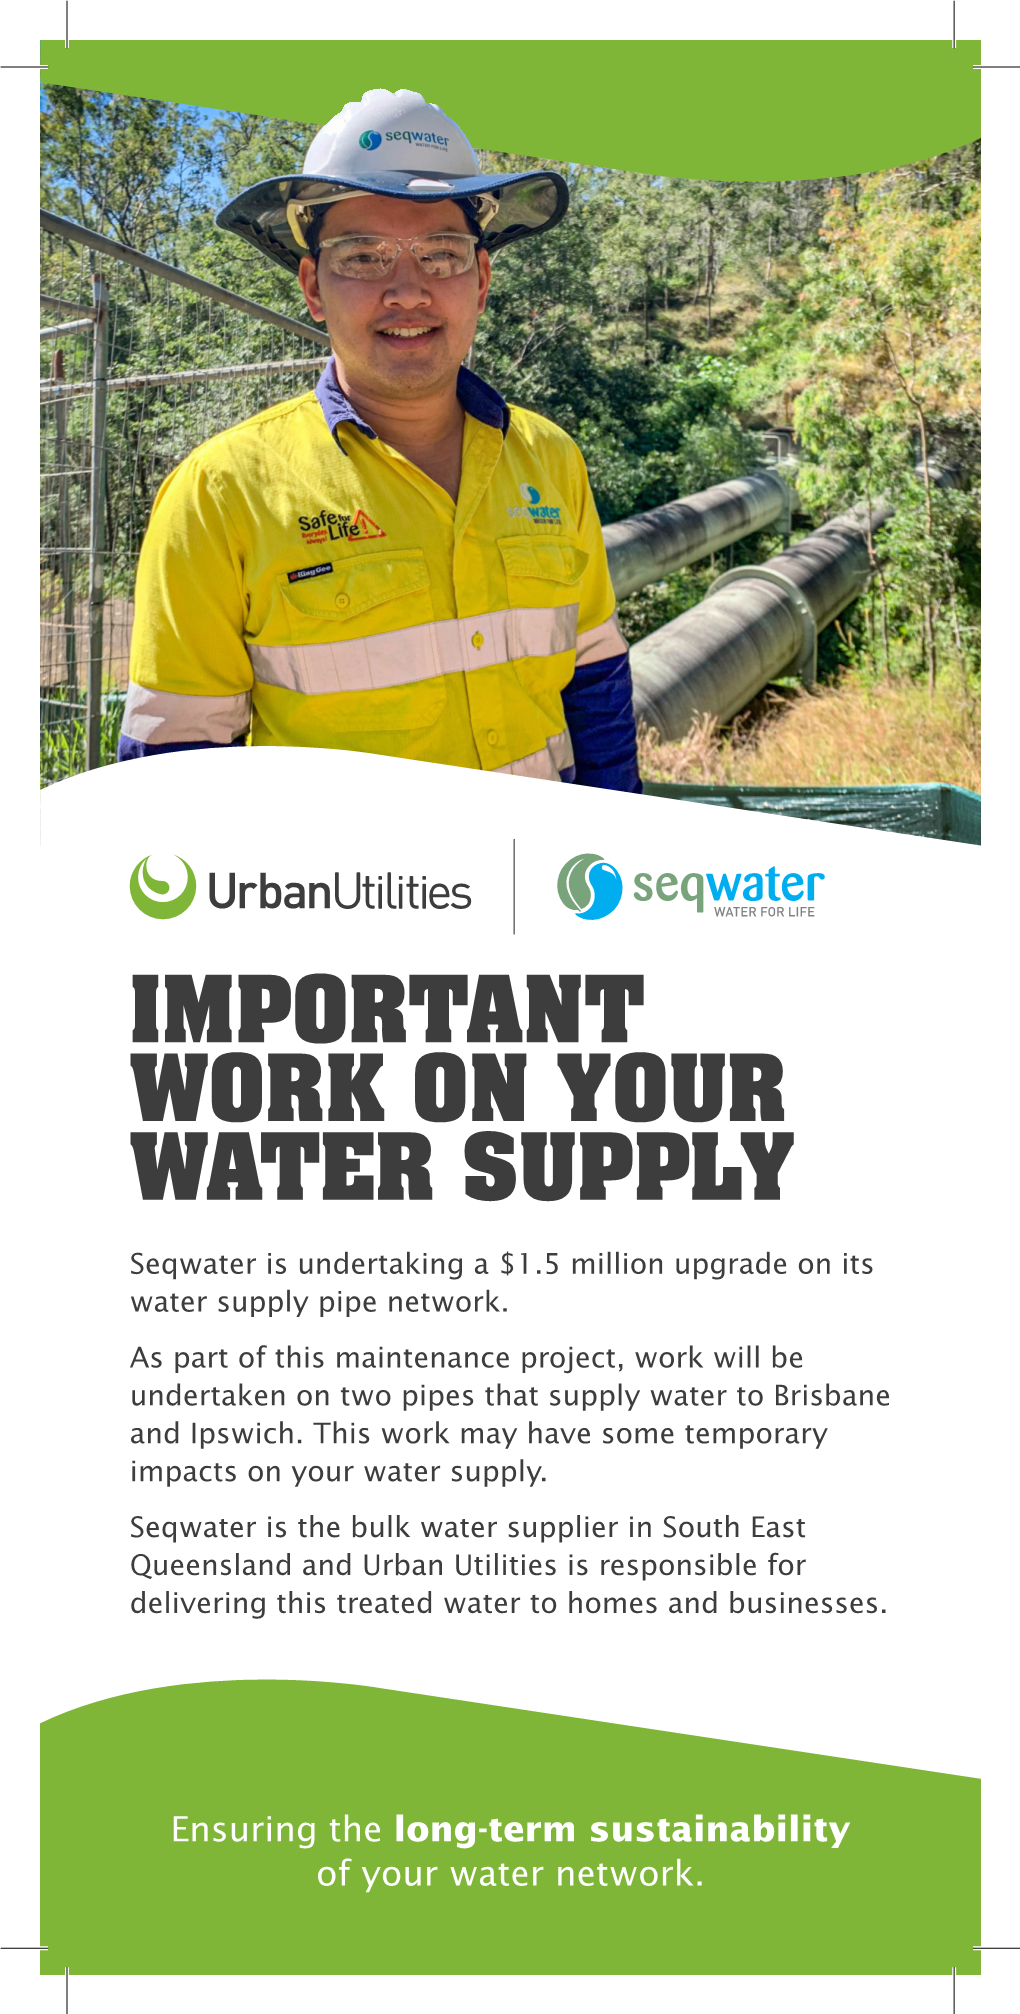 IMPORTANT WORK on YOUR WATER SUPPLY Seqwater Is Undertaking a $1.5 Million Upgrade on Its Water Supply Pipe Network